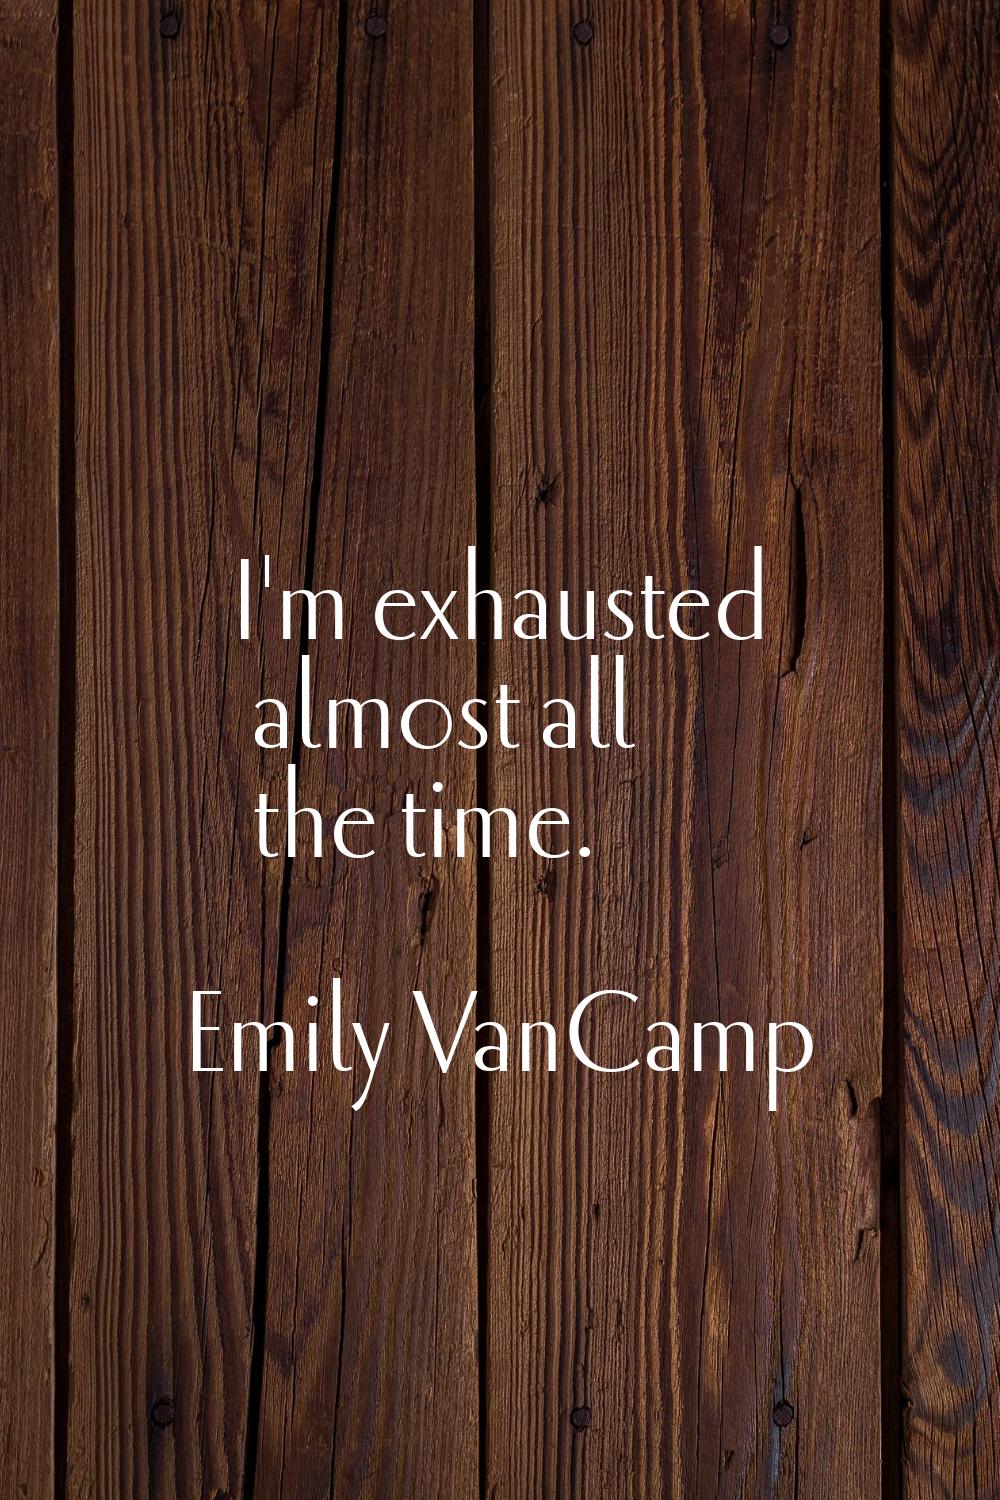 I'm exhausted almost all the time.